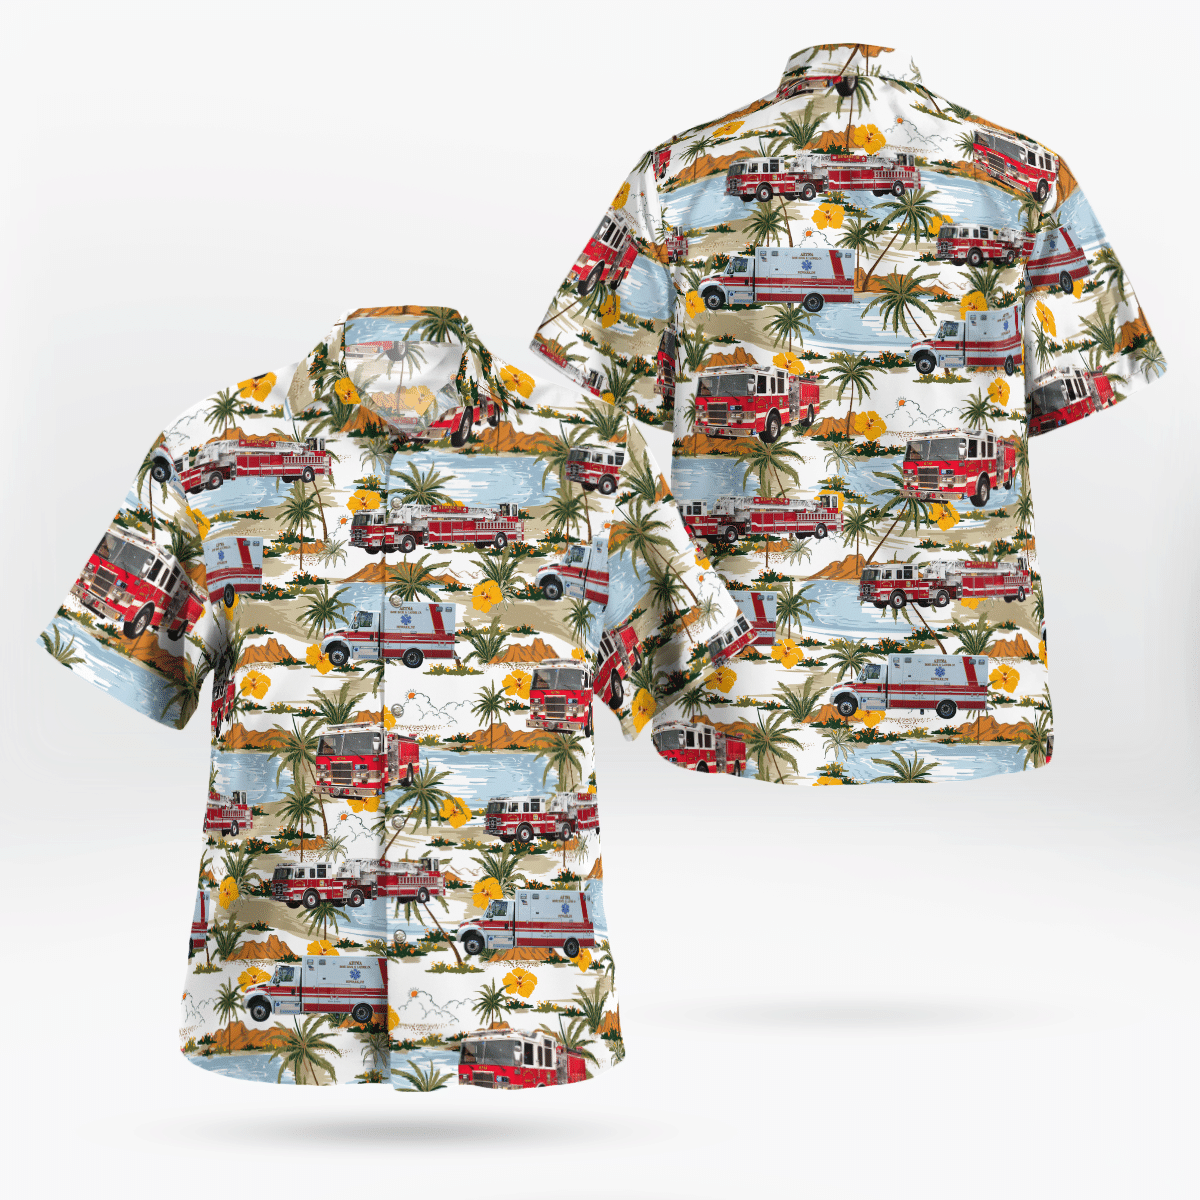 If you are in need of a new summertime look, pick up this Hawaiian shirt 85